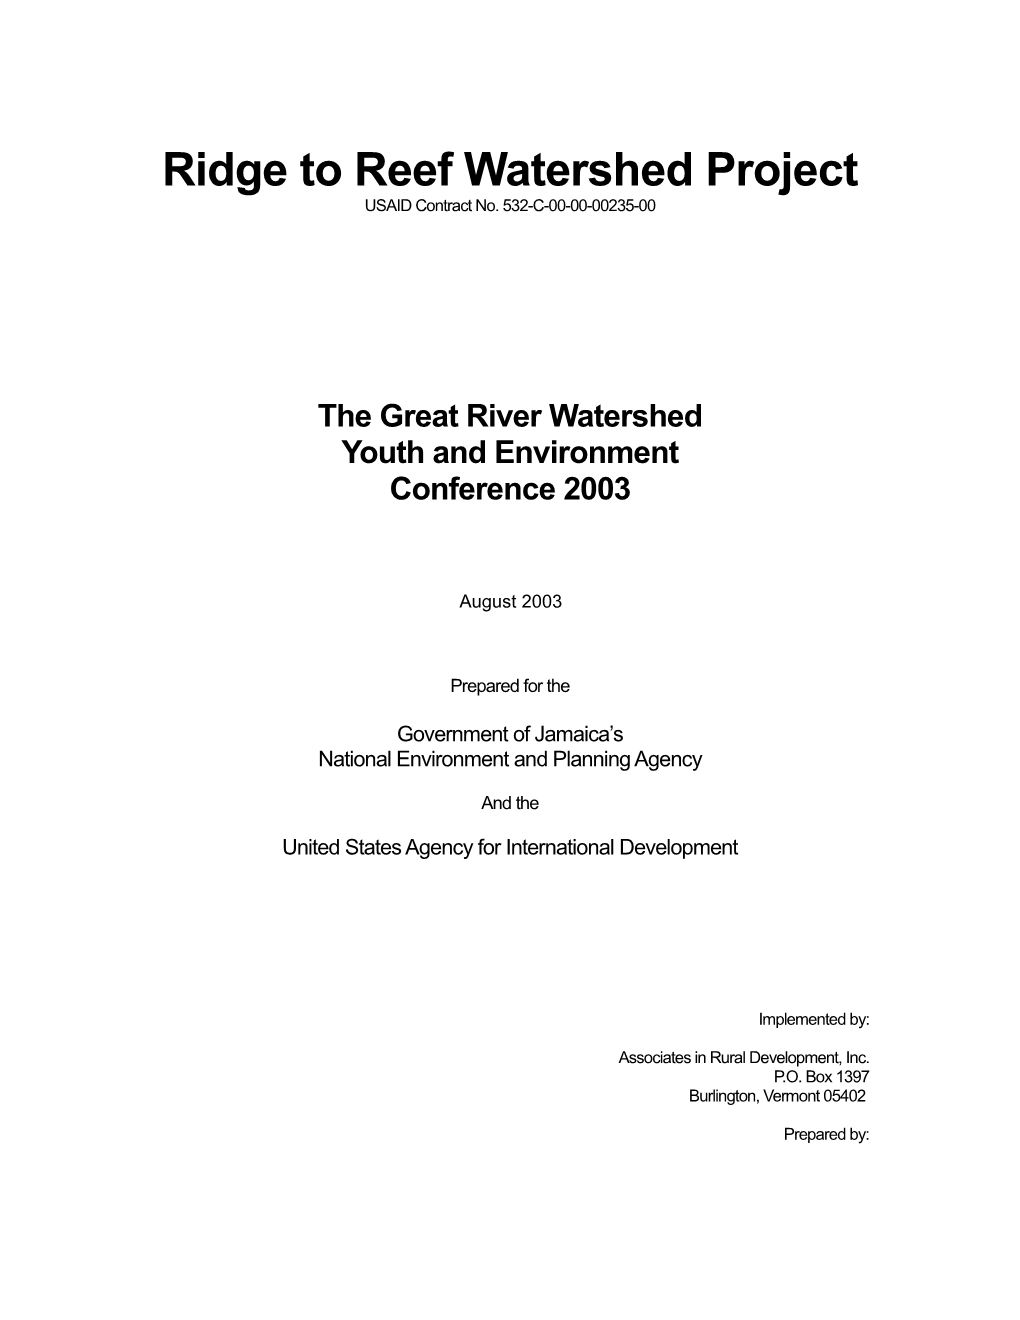 Report on the Great River Watershed Youth & Environment Conference 2003